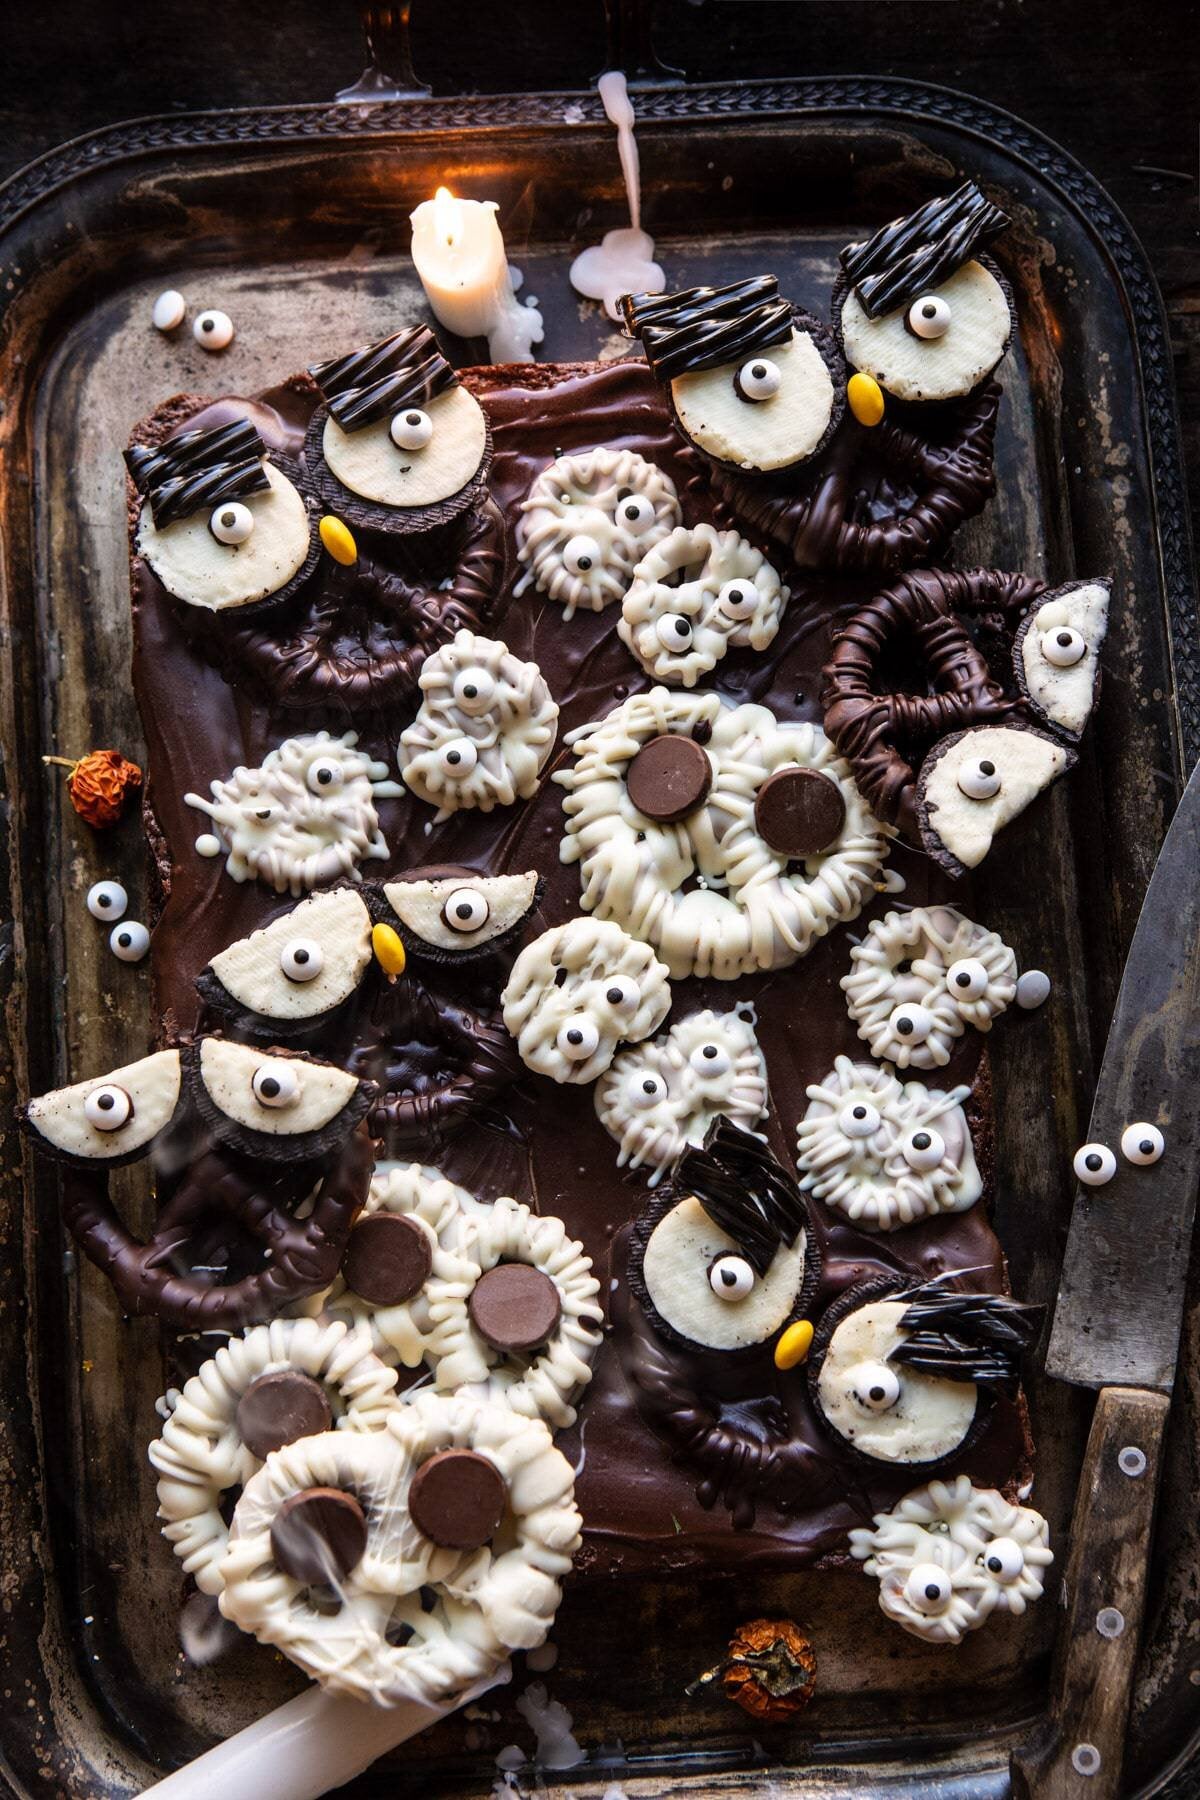 Boo! Spooky Monster Chocolate Covered Pretzel Brownies.